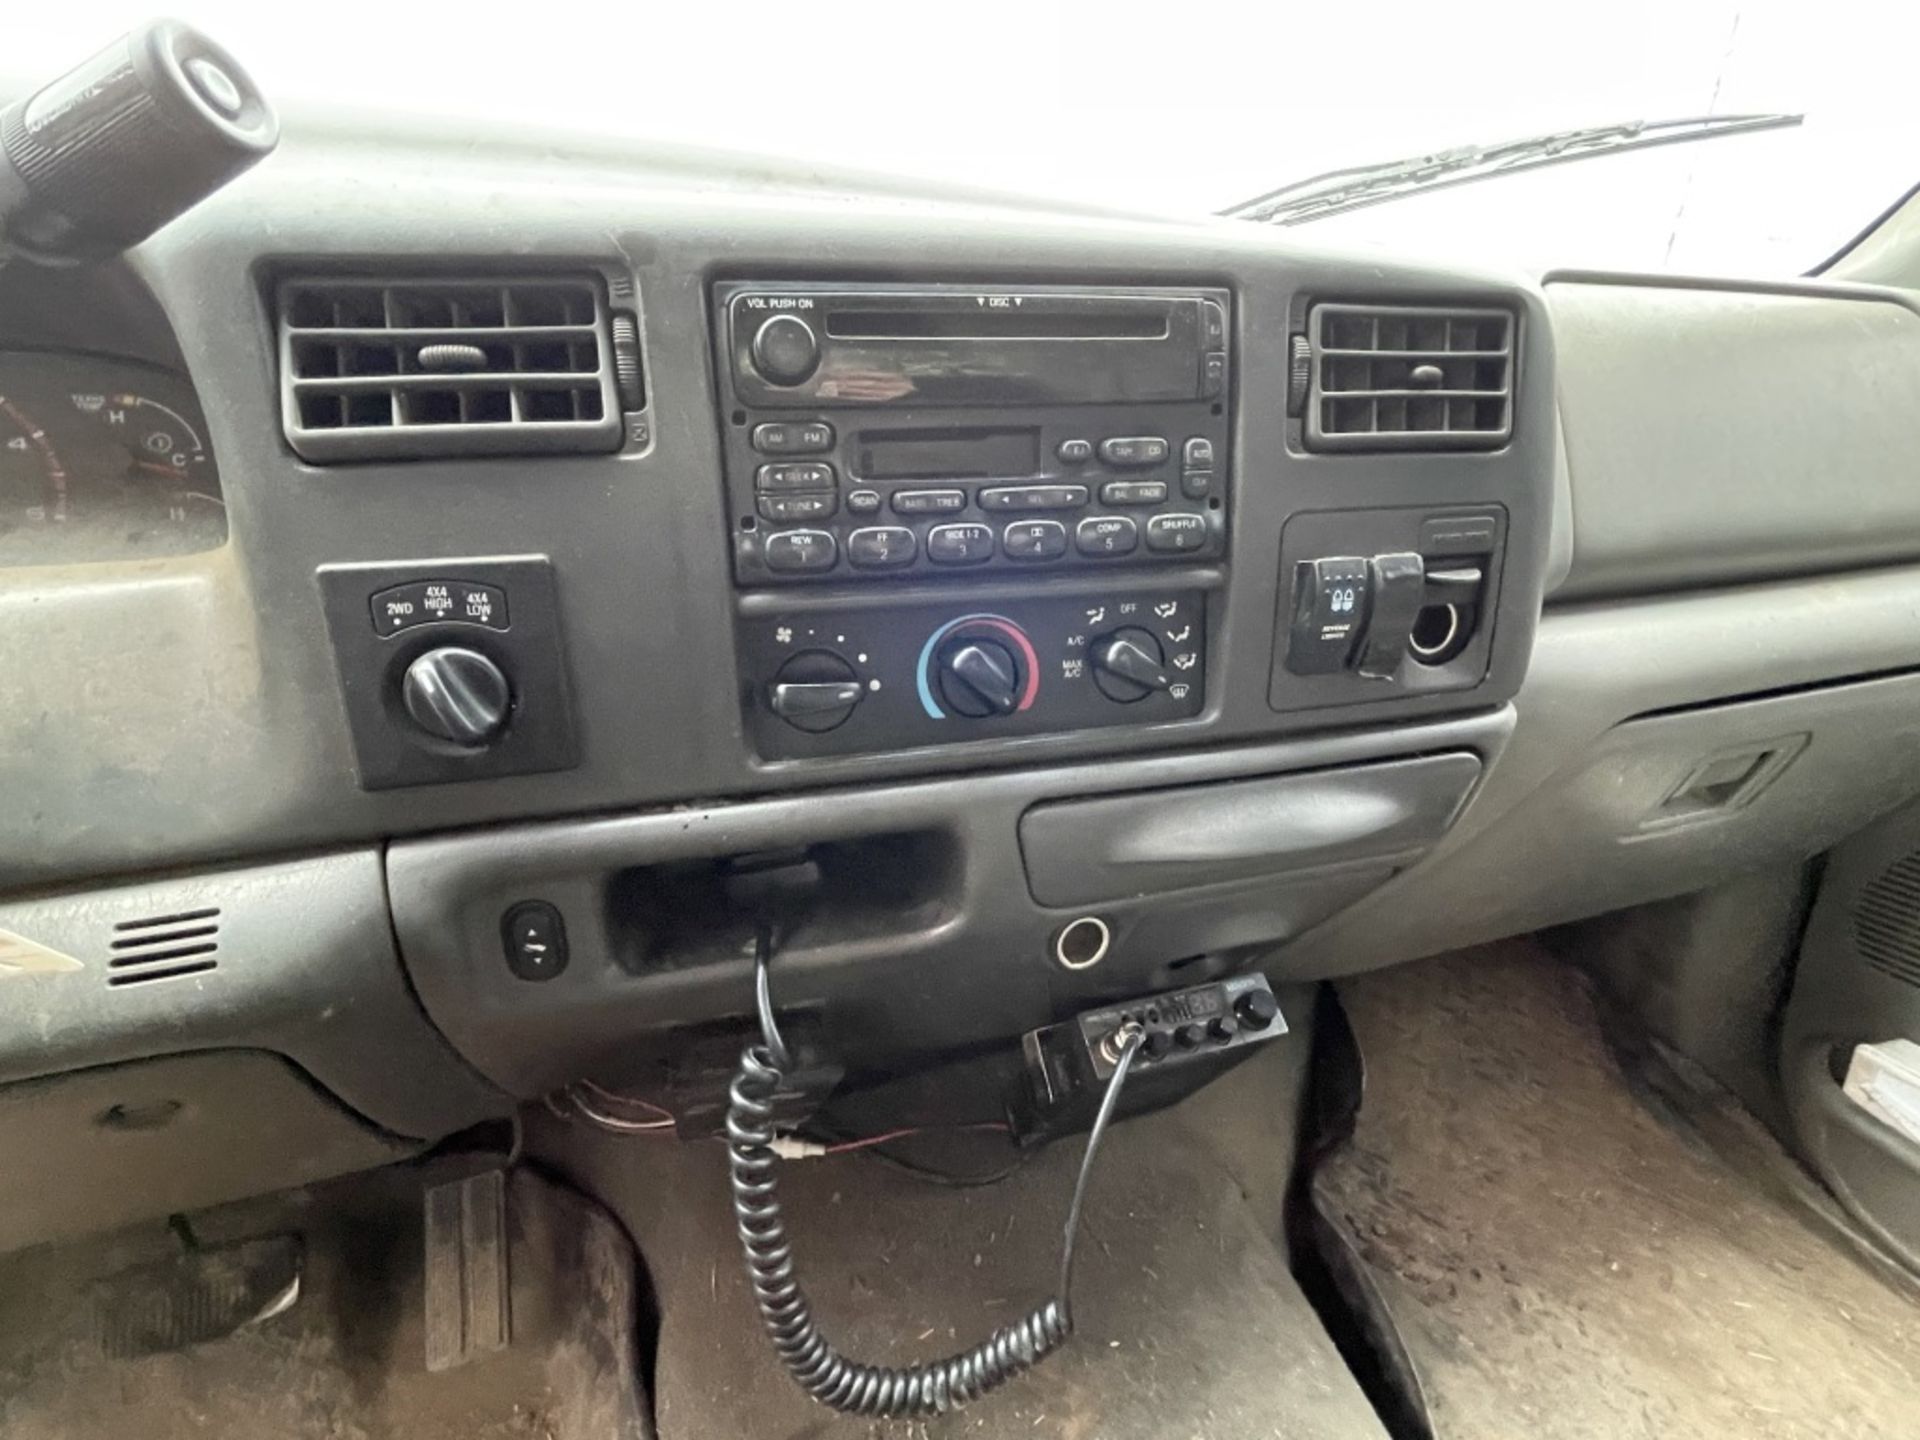 2002 Ford F350 SD 4x4 Crew Cab Pickup - Image 8 of 16